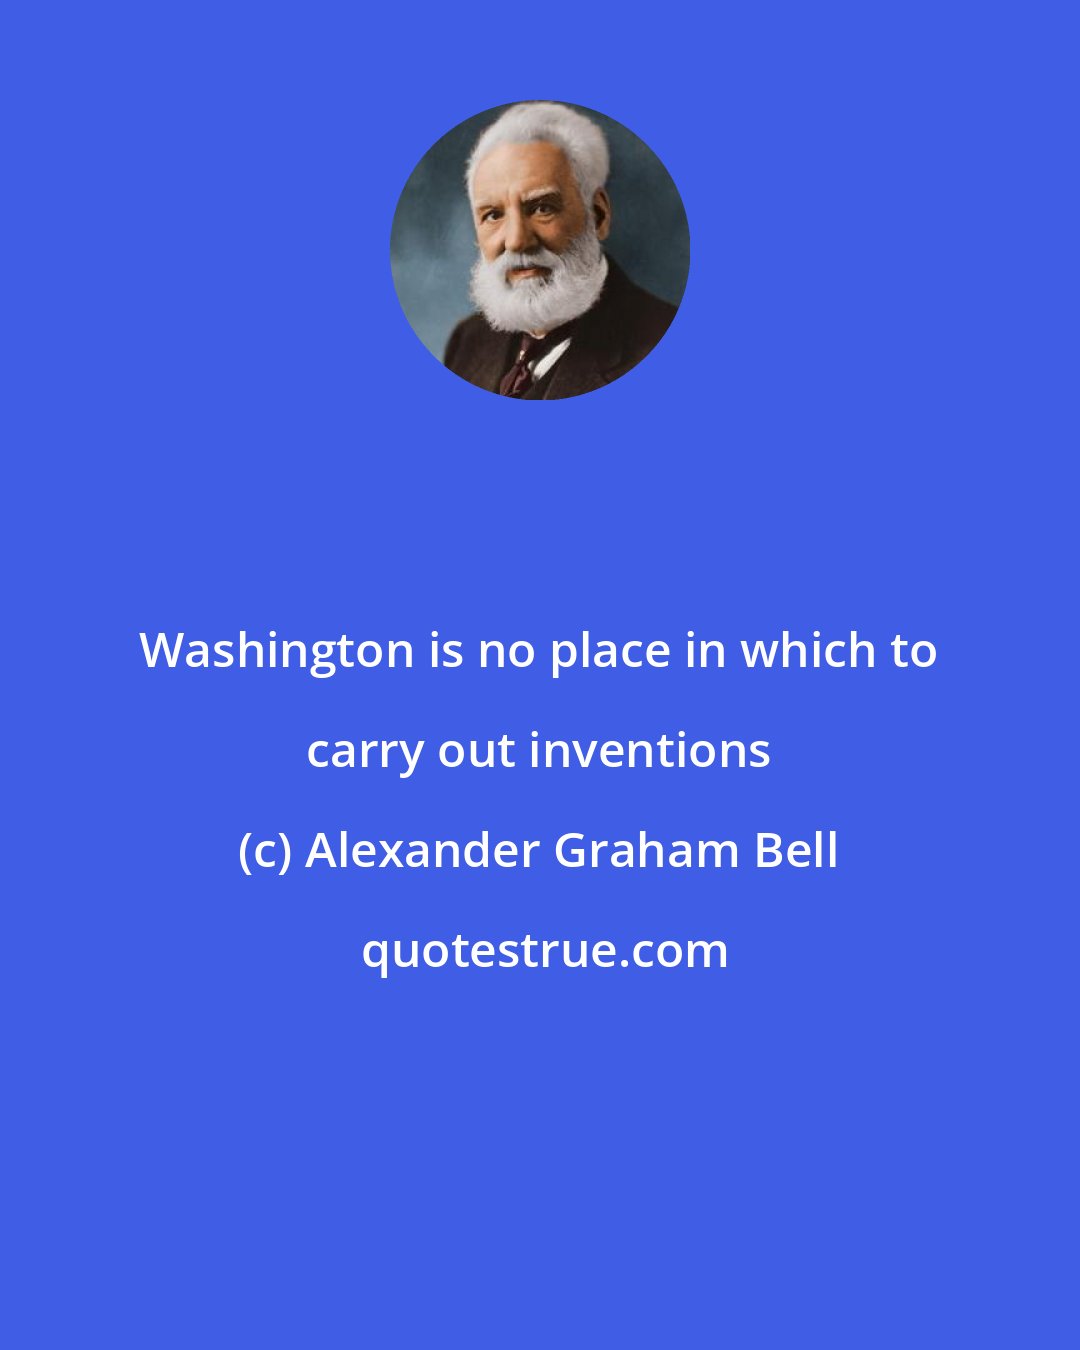 Alexander Graham Bell: Washington is no place in which to carry out inventions